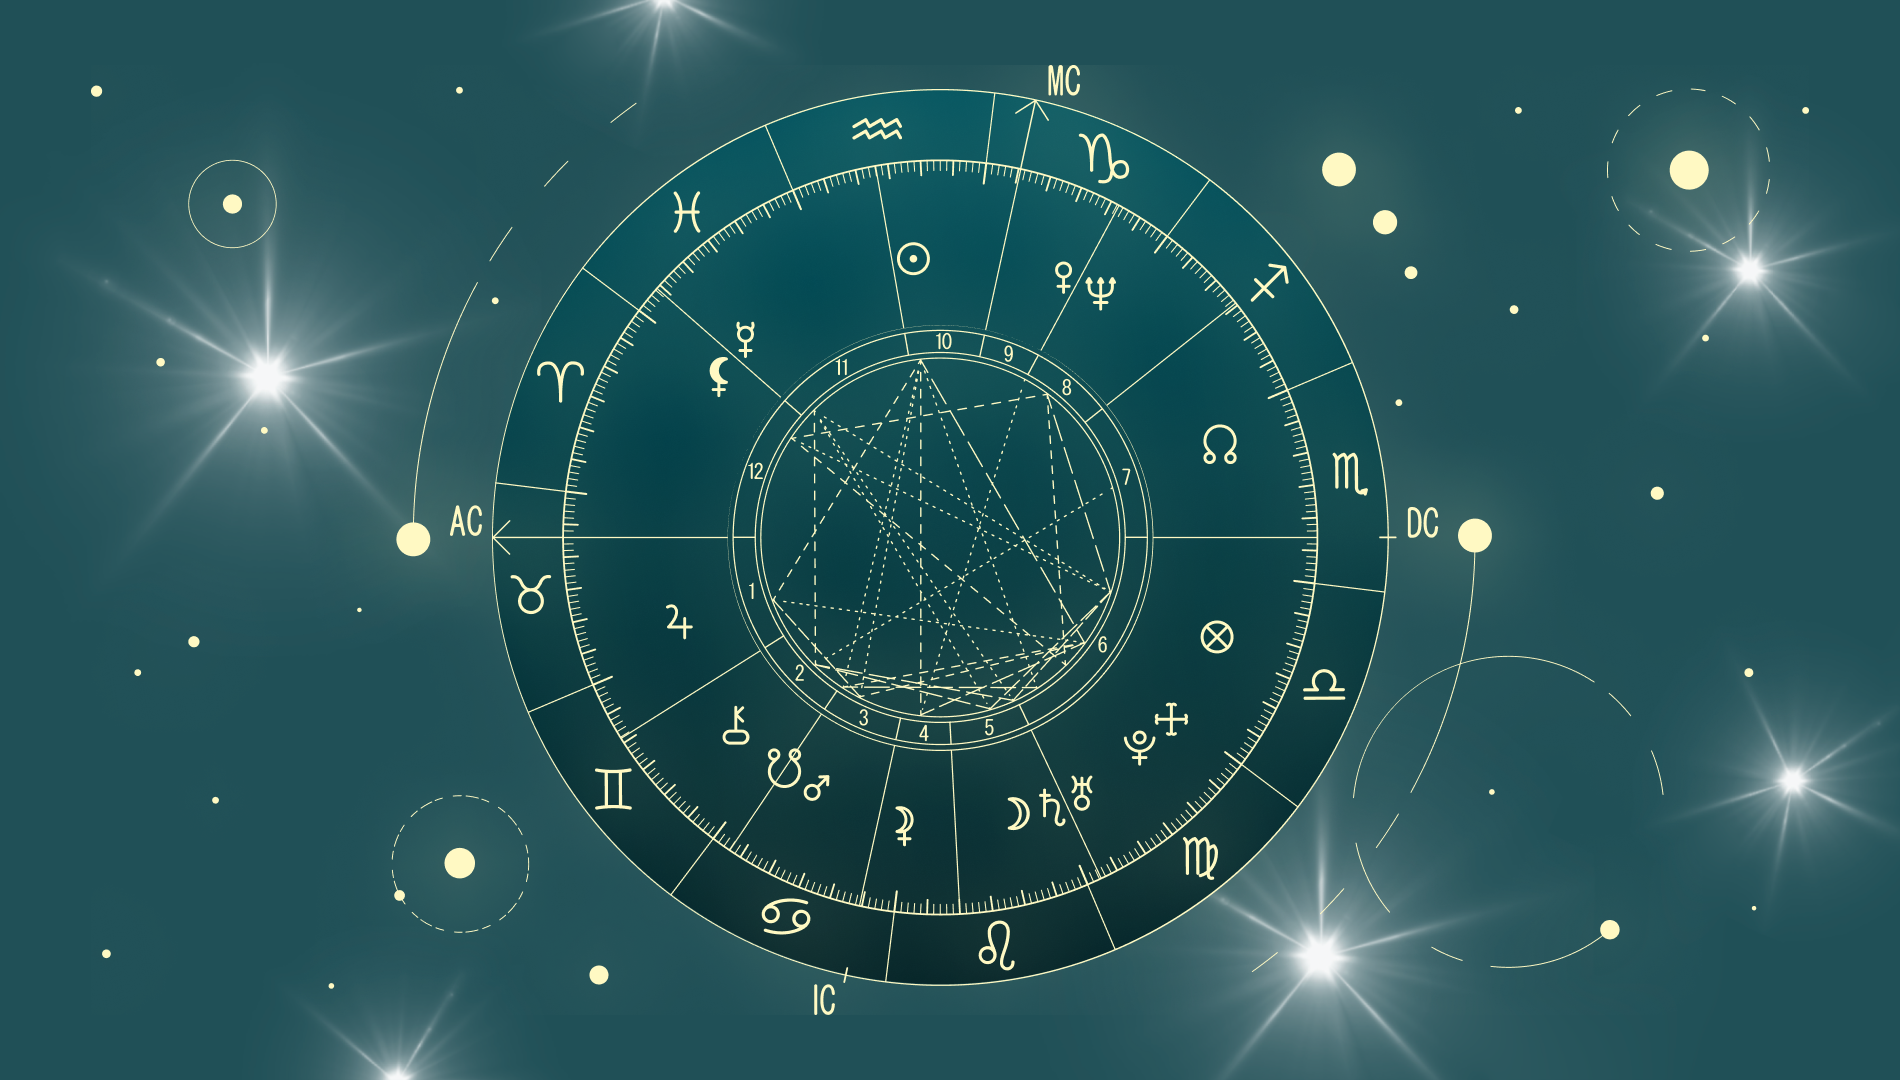 Pop Cultured with theSkimm promo image August 2, 2022 featuring an image of an astrology birth chart.